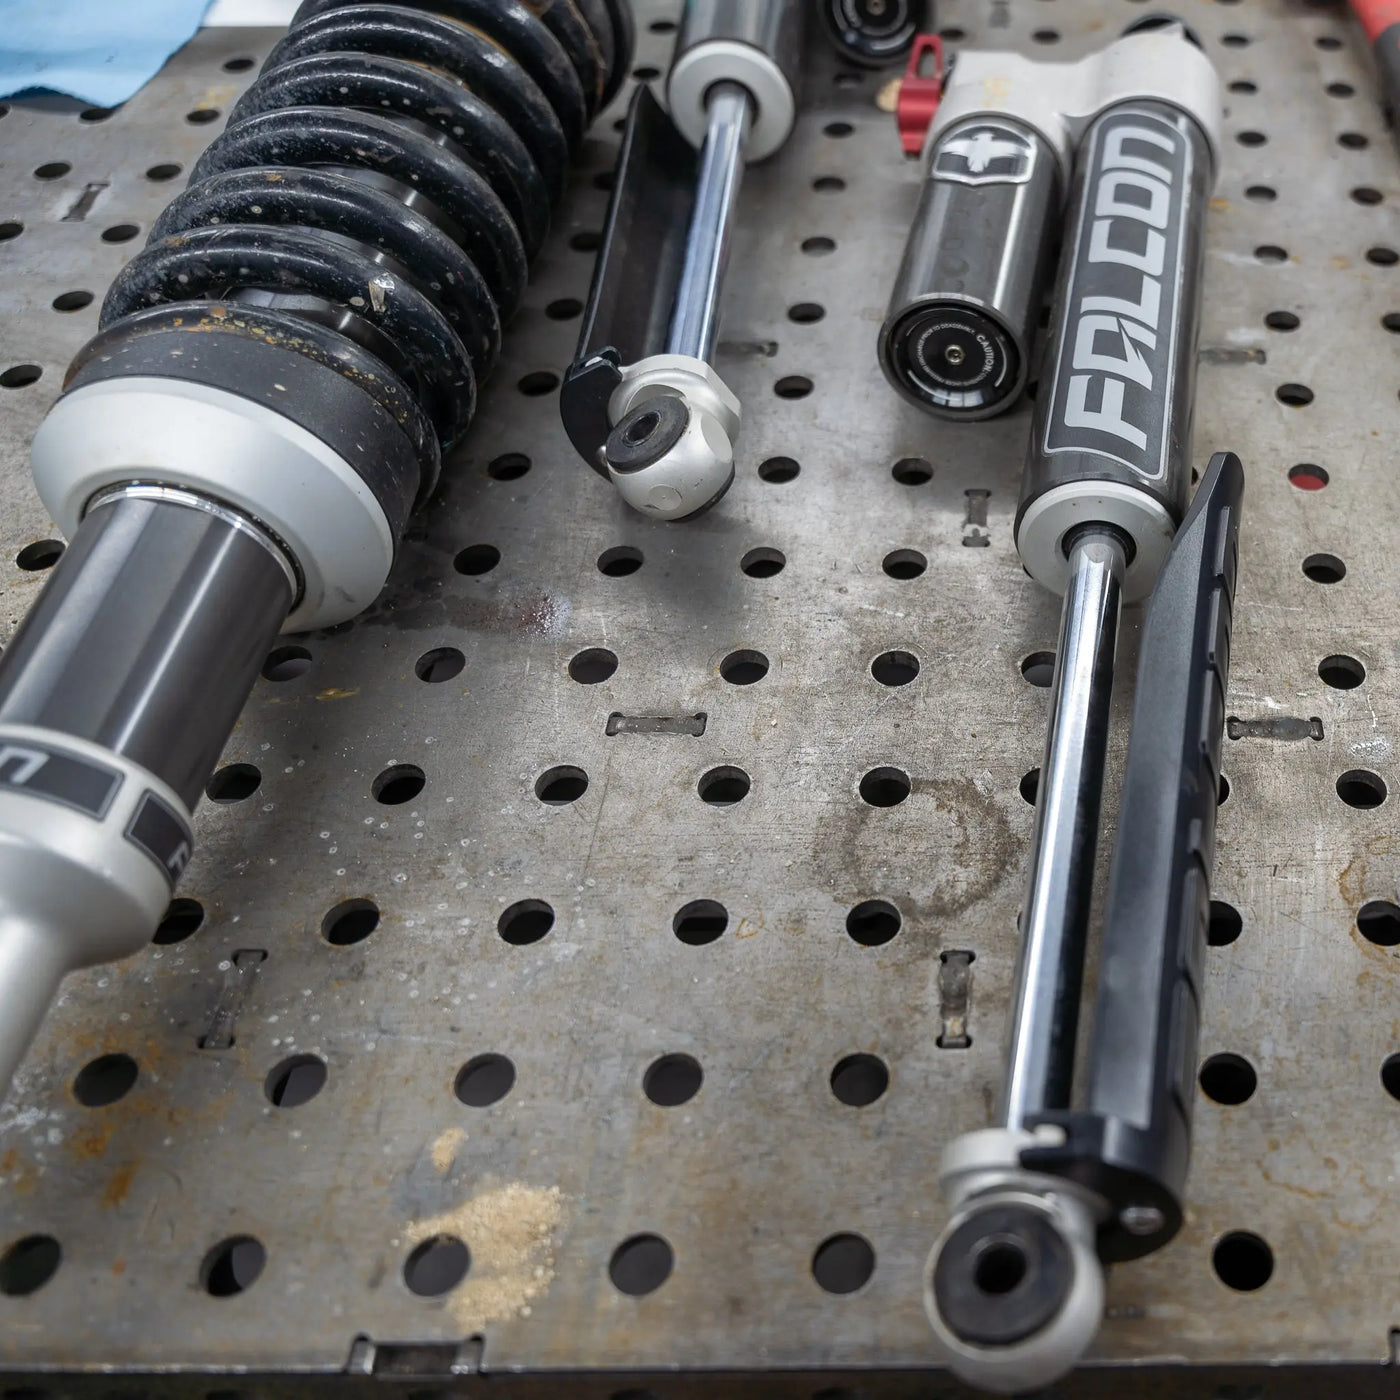 Falcon Shocks 2005+ Toyota Tacoma Falcon Sport Leveling Shock Absorber System - Wheel Every Weekend